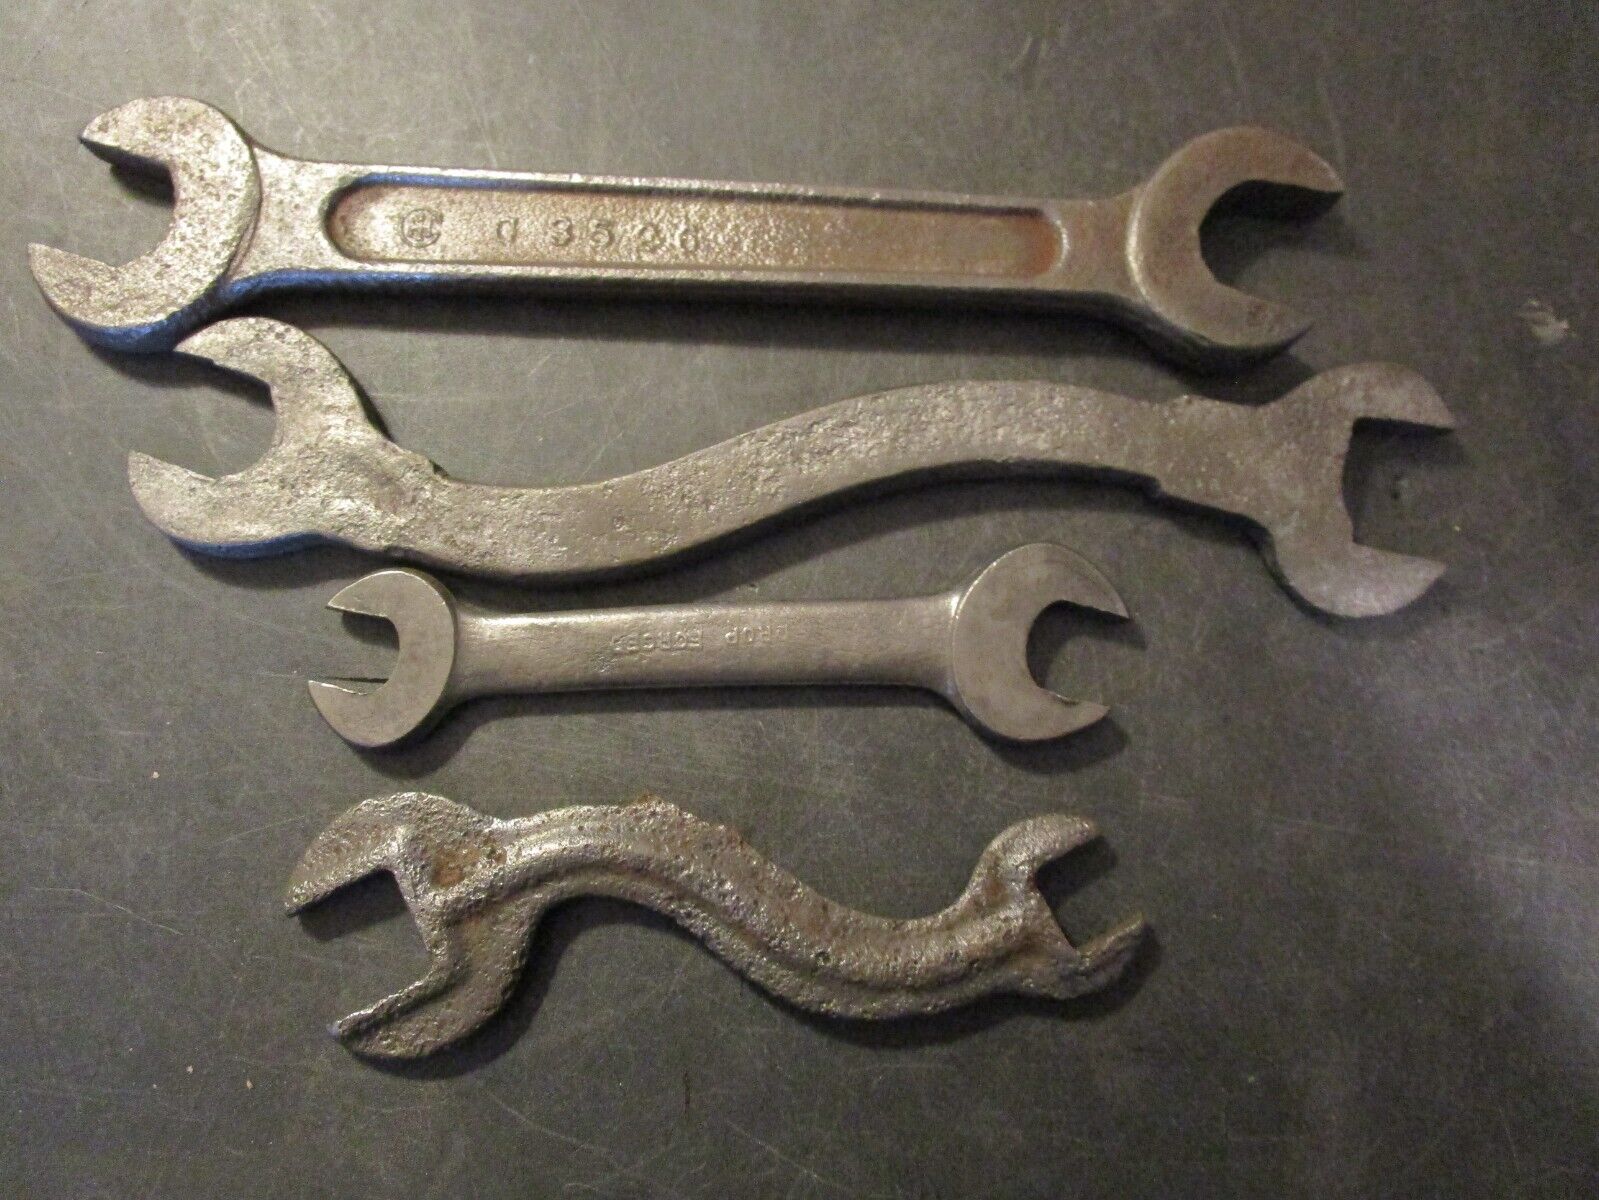 ANOTHER LOT OF 4 ANTIQUE / VINTAGE FARM IMPLEMENT TRACTOR AUTO MECHANIC WRENCHES